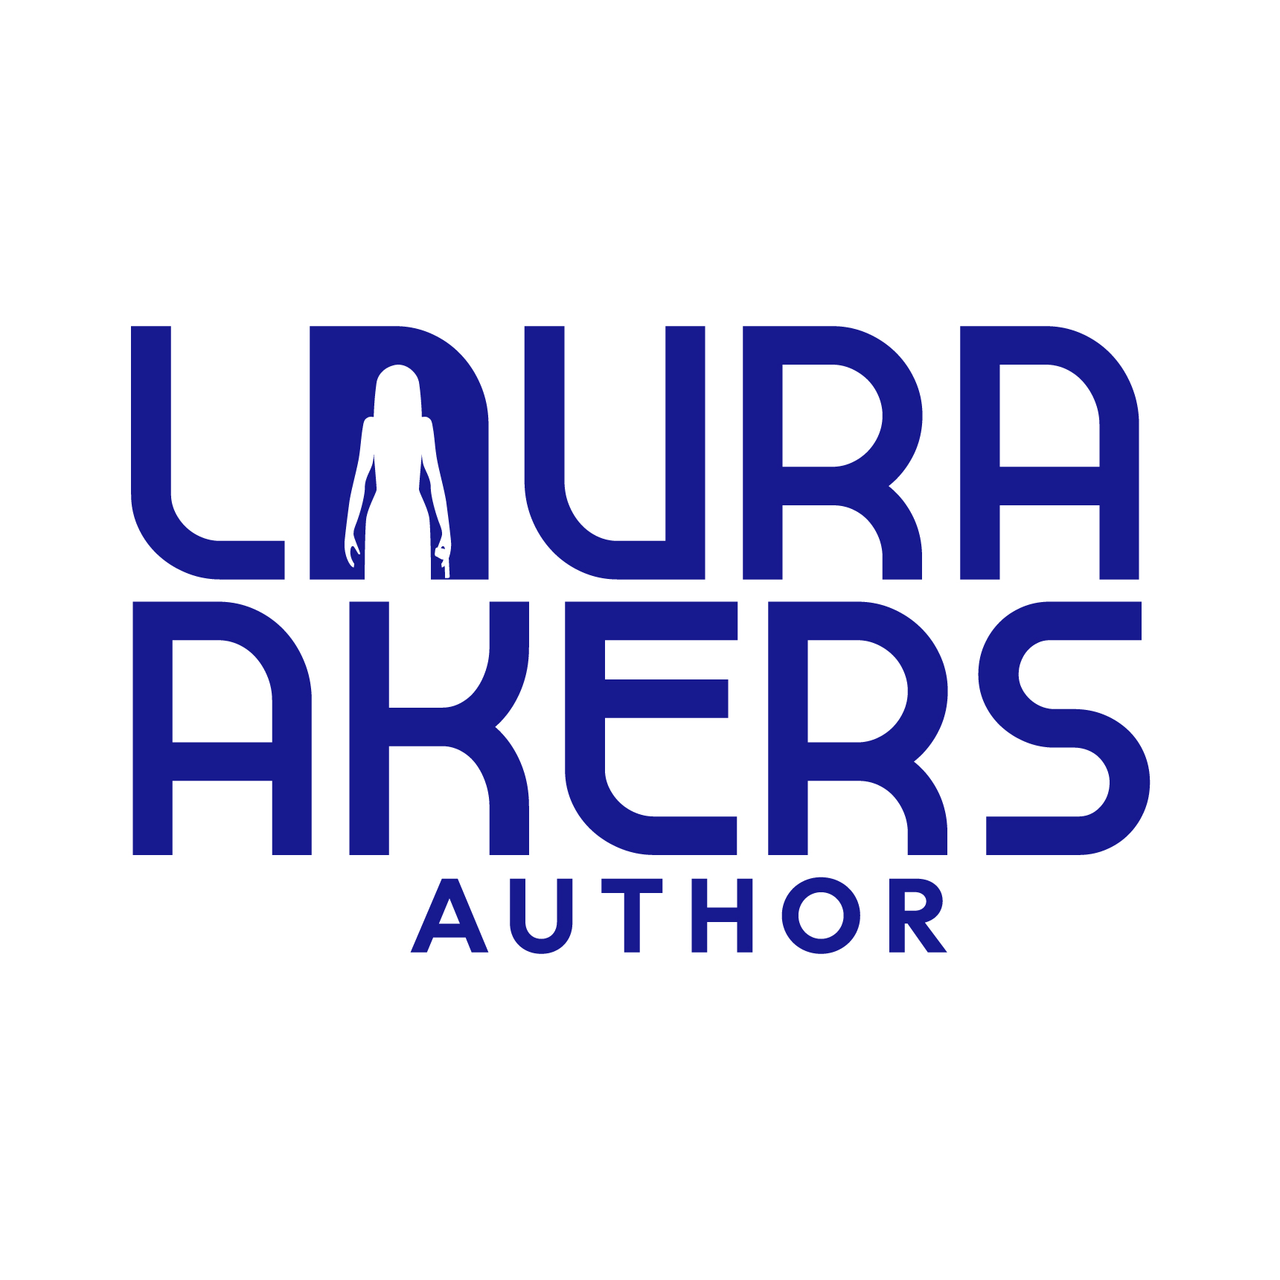 Author Laura Akers' Substack